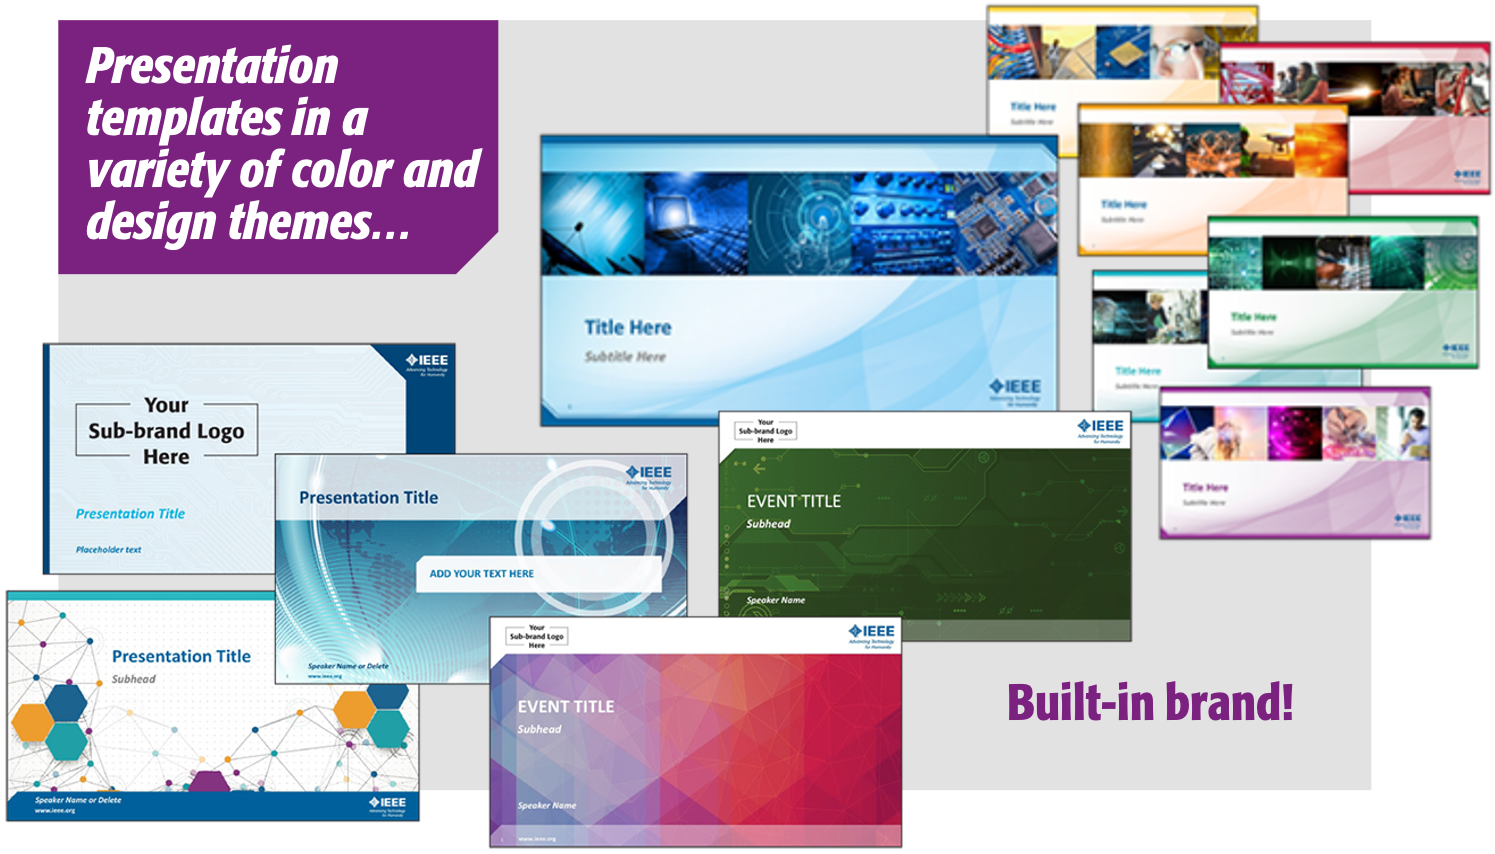 image showing various PowerPoint templates